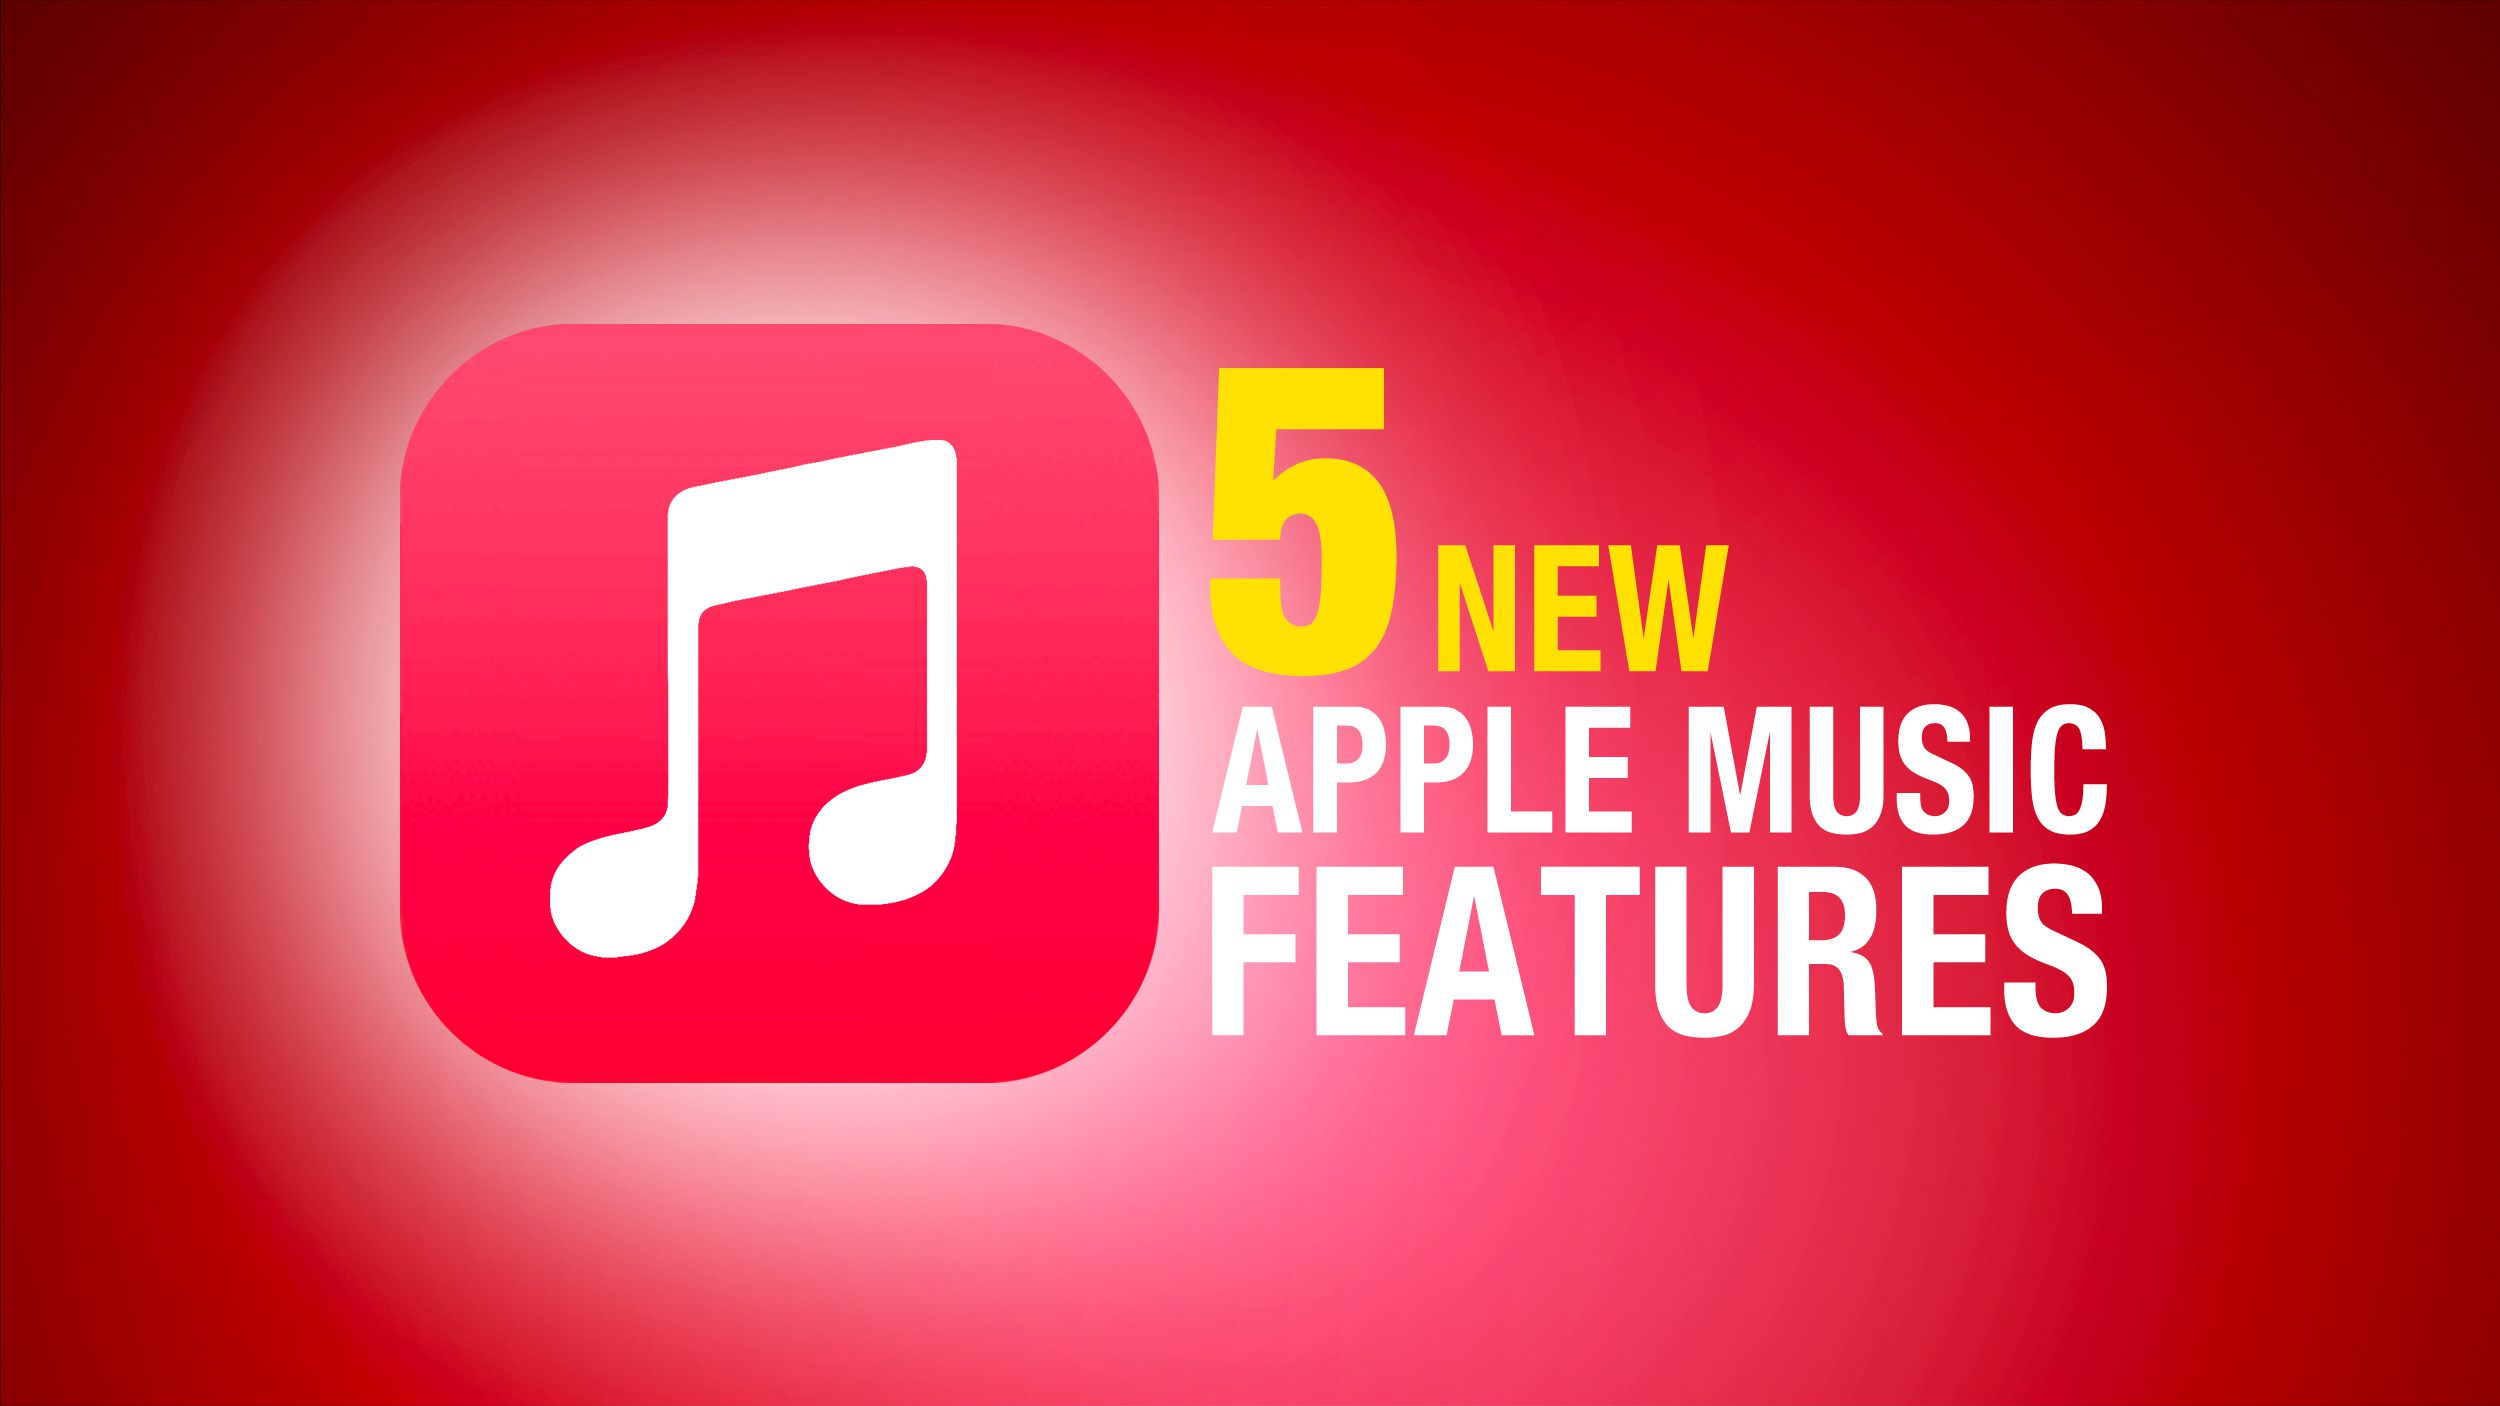 5 New Apple Music Features Feature 1.jpg